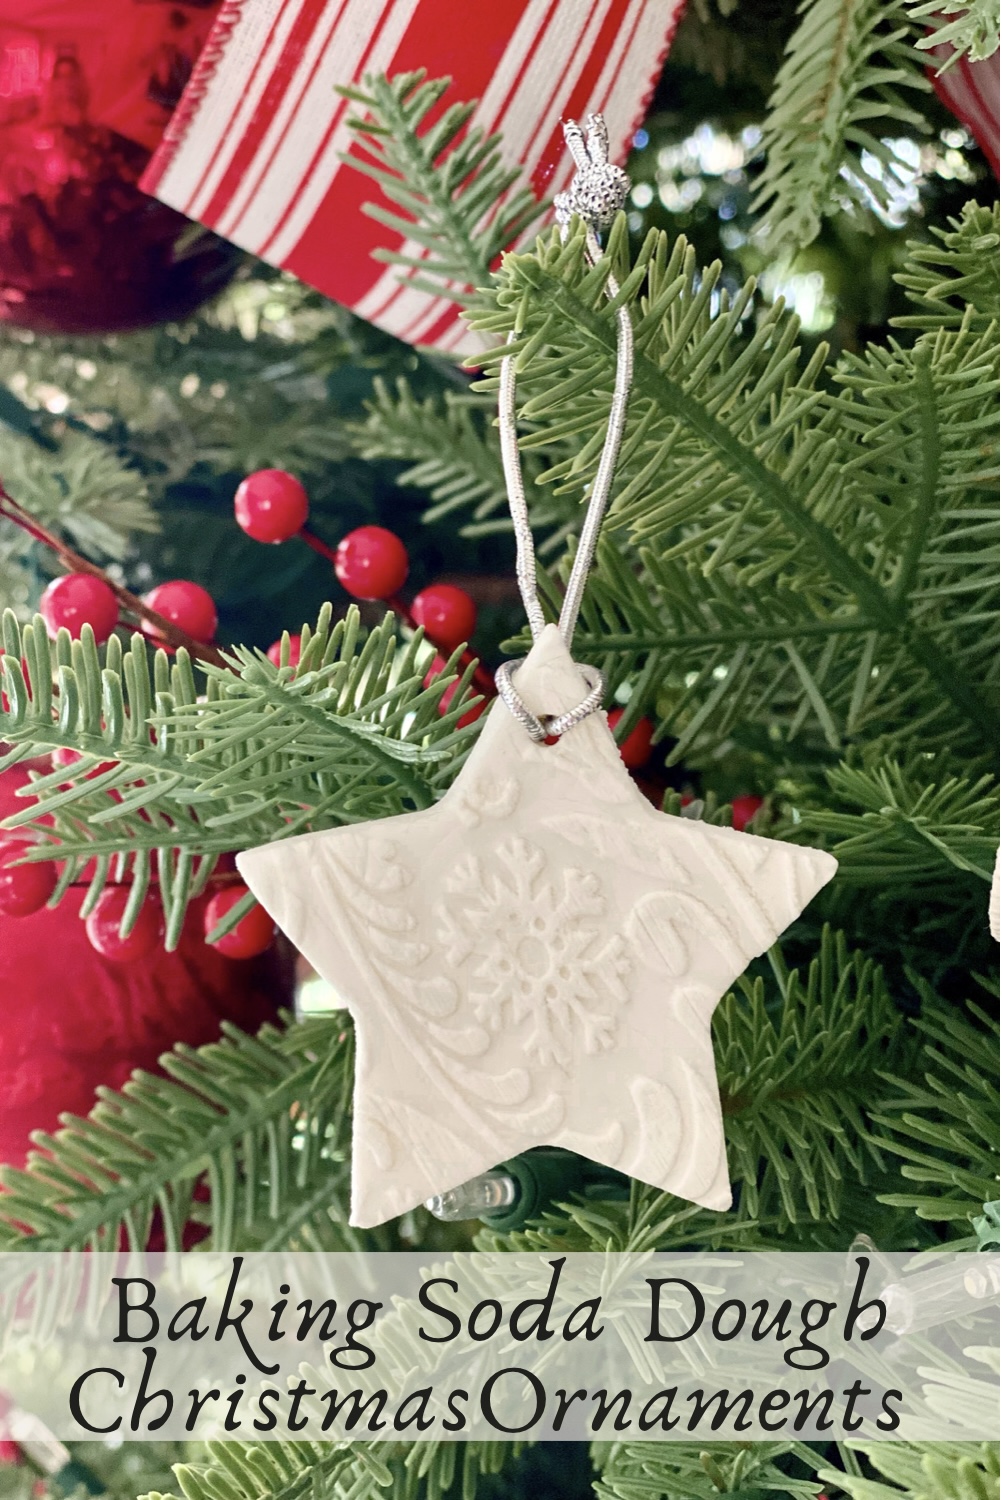 Baking soda dough ornament in the shape of a star hanging from the Christmas tree.